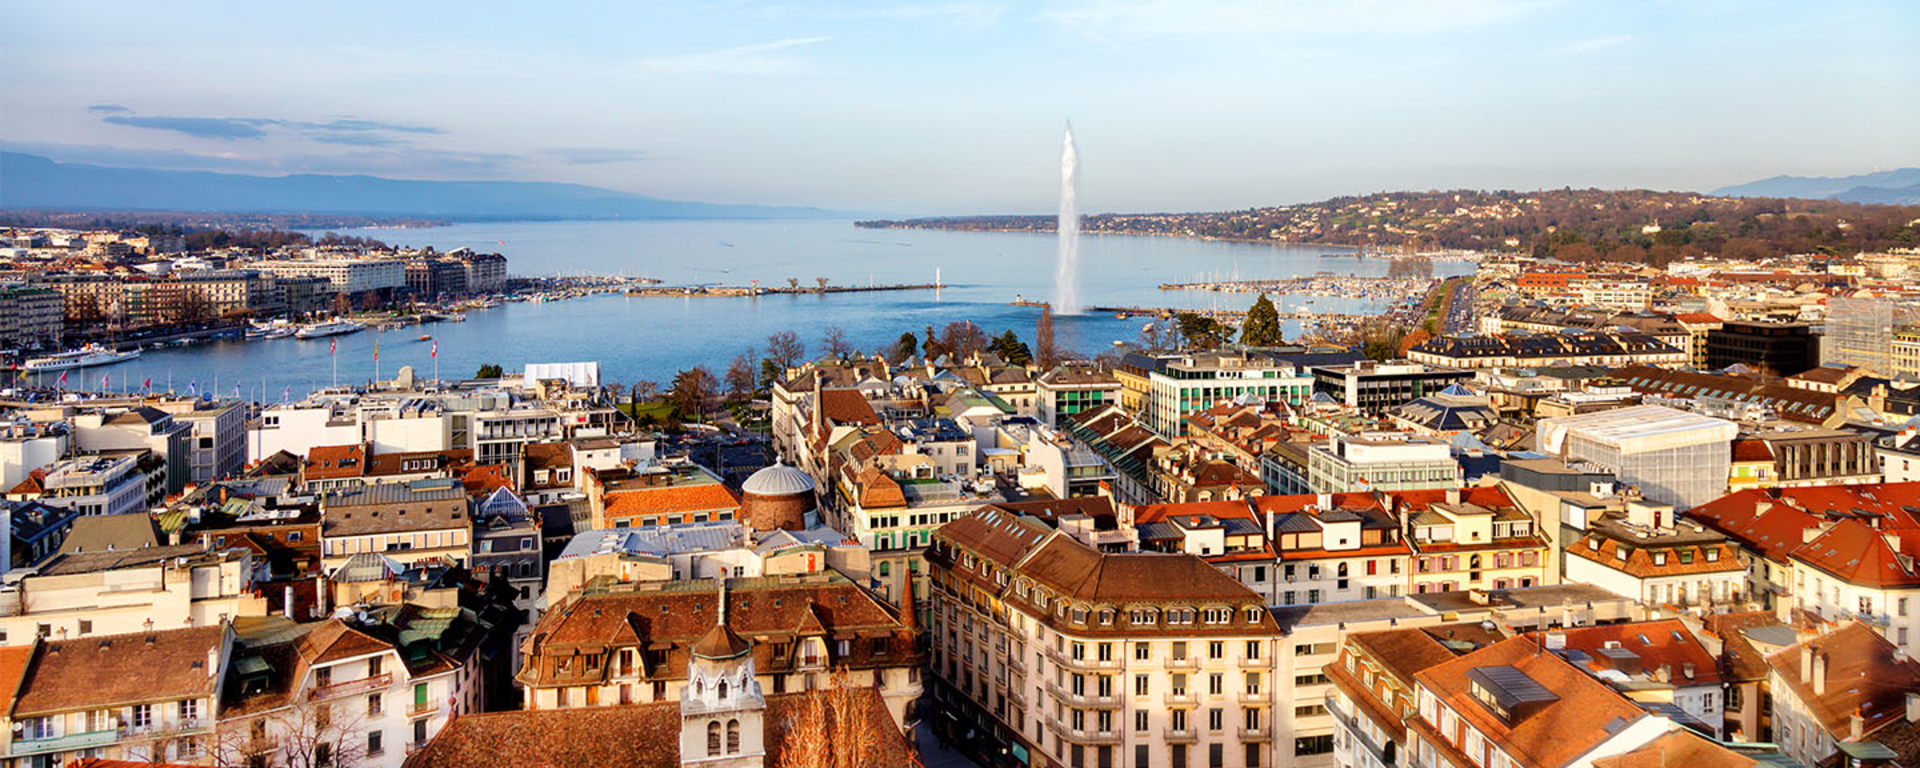 Vontobel in Geneva - view of the city and the lake